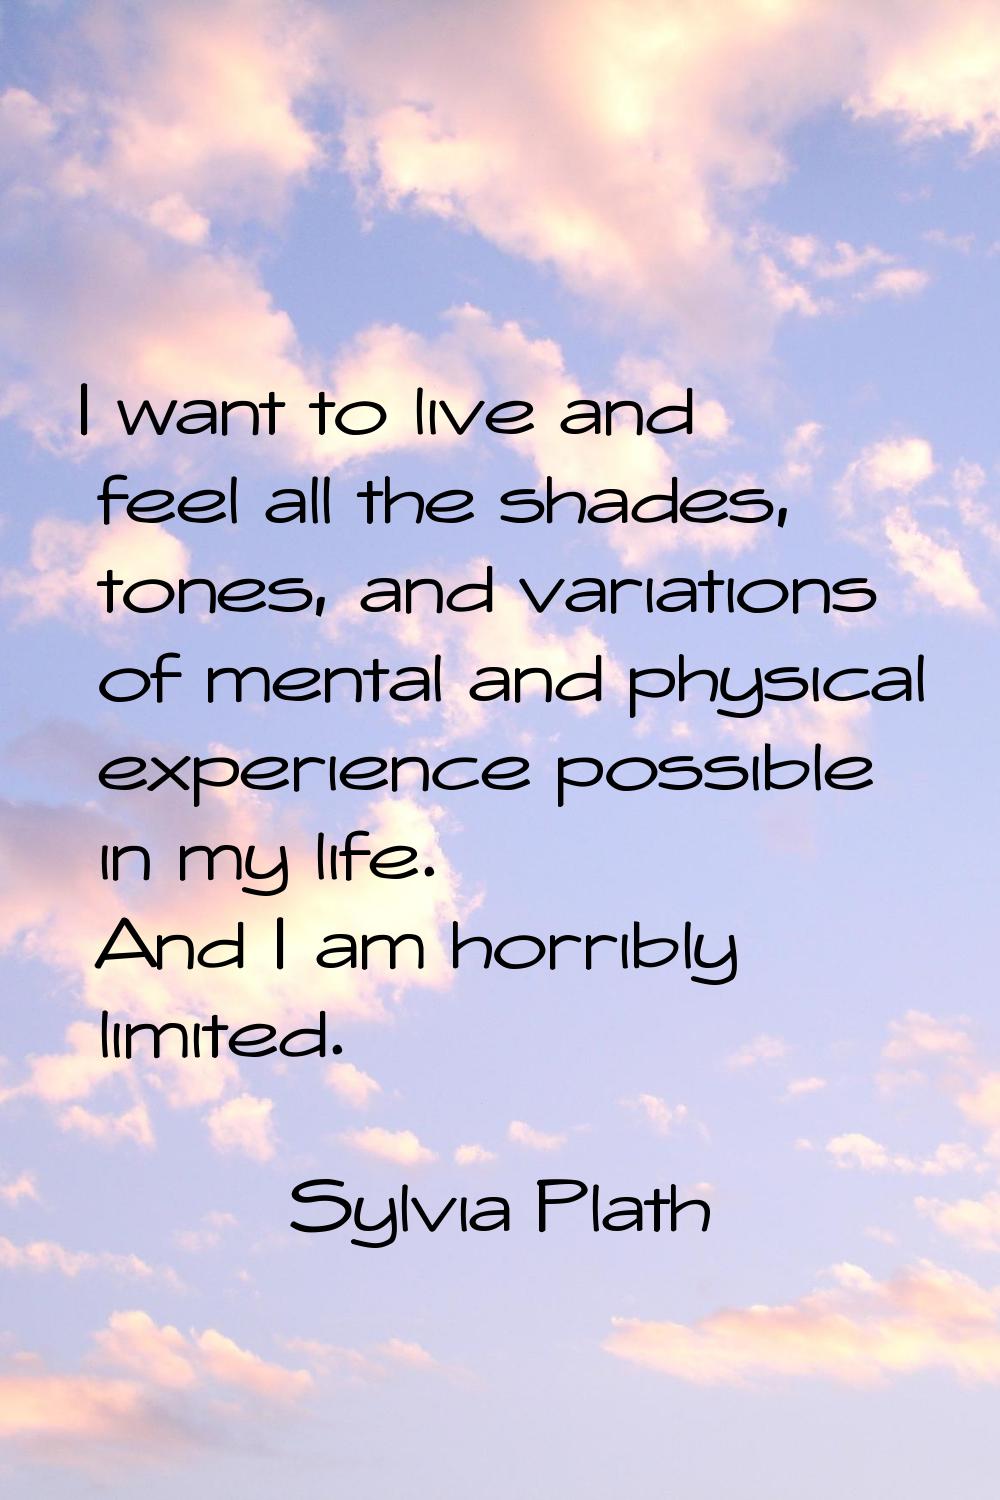 I want to live and feel all the shades, tones, and variations of mental and physical experience pos